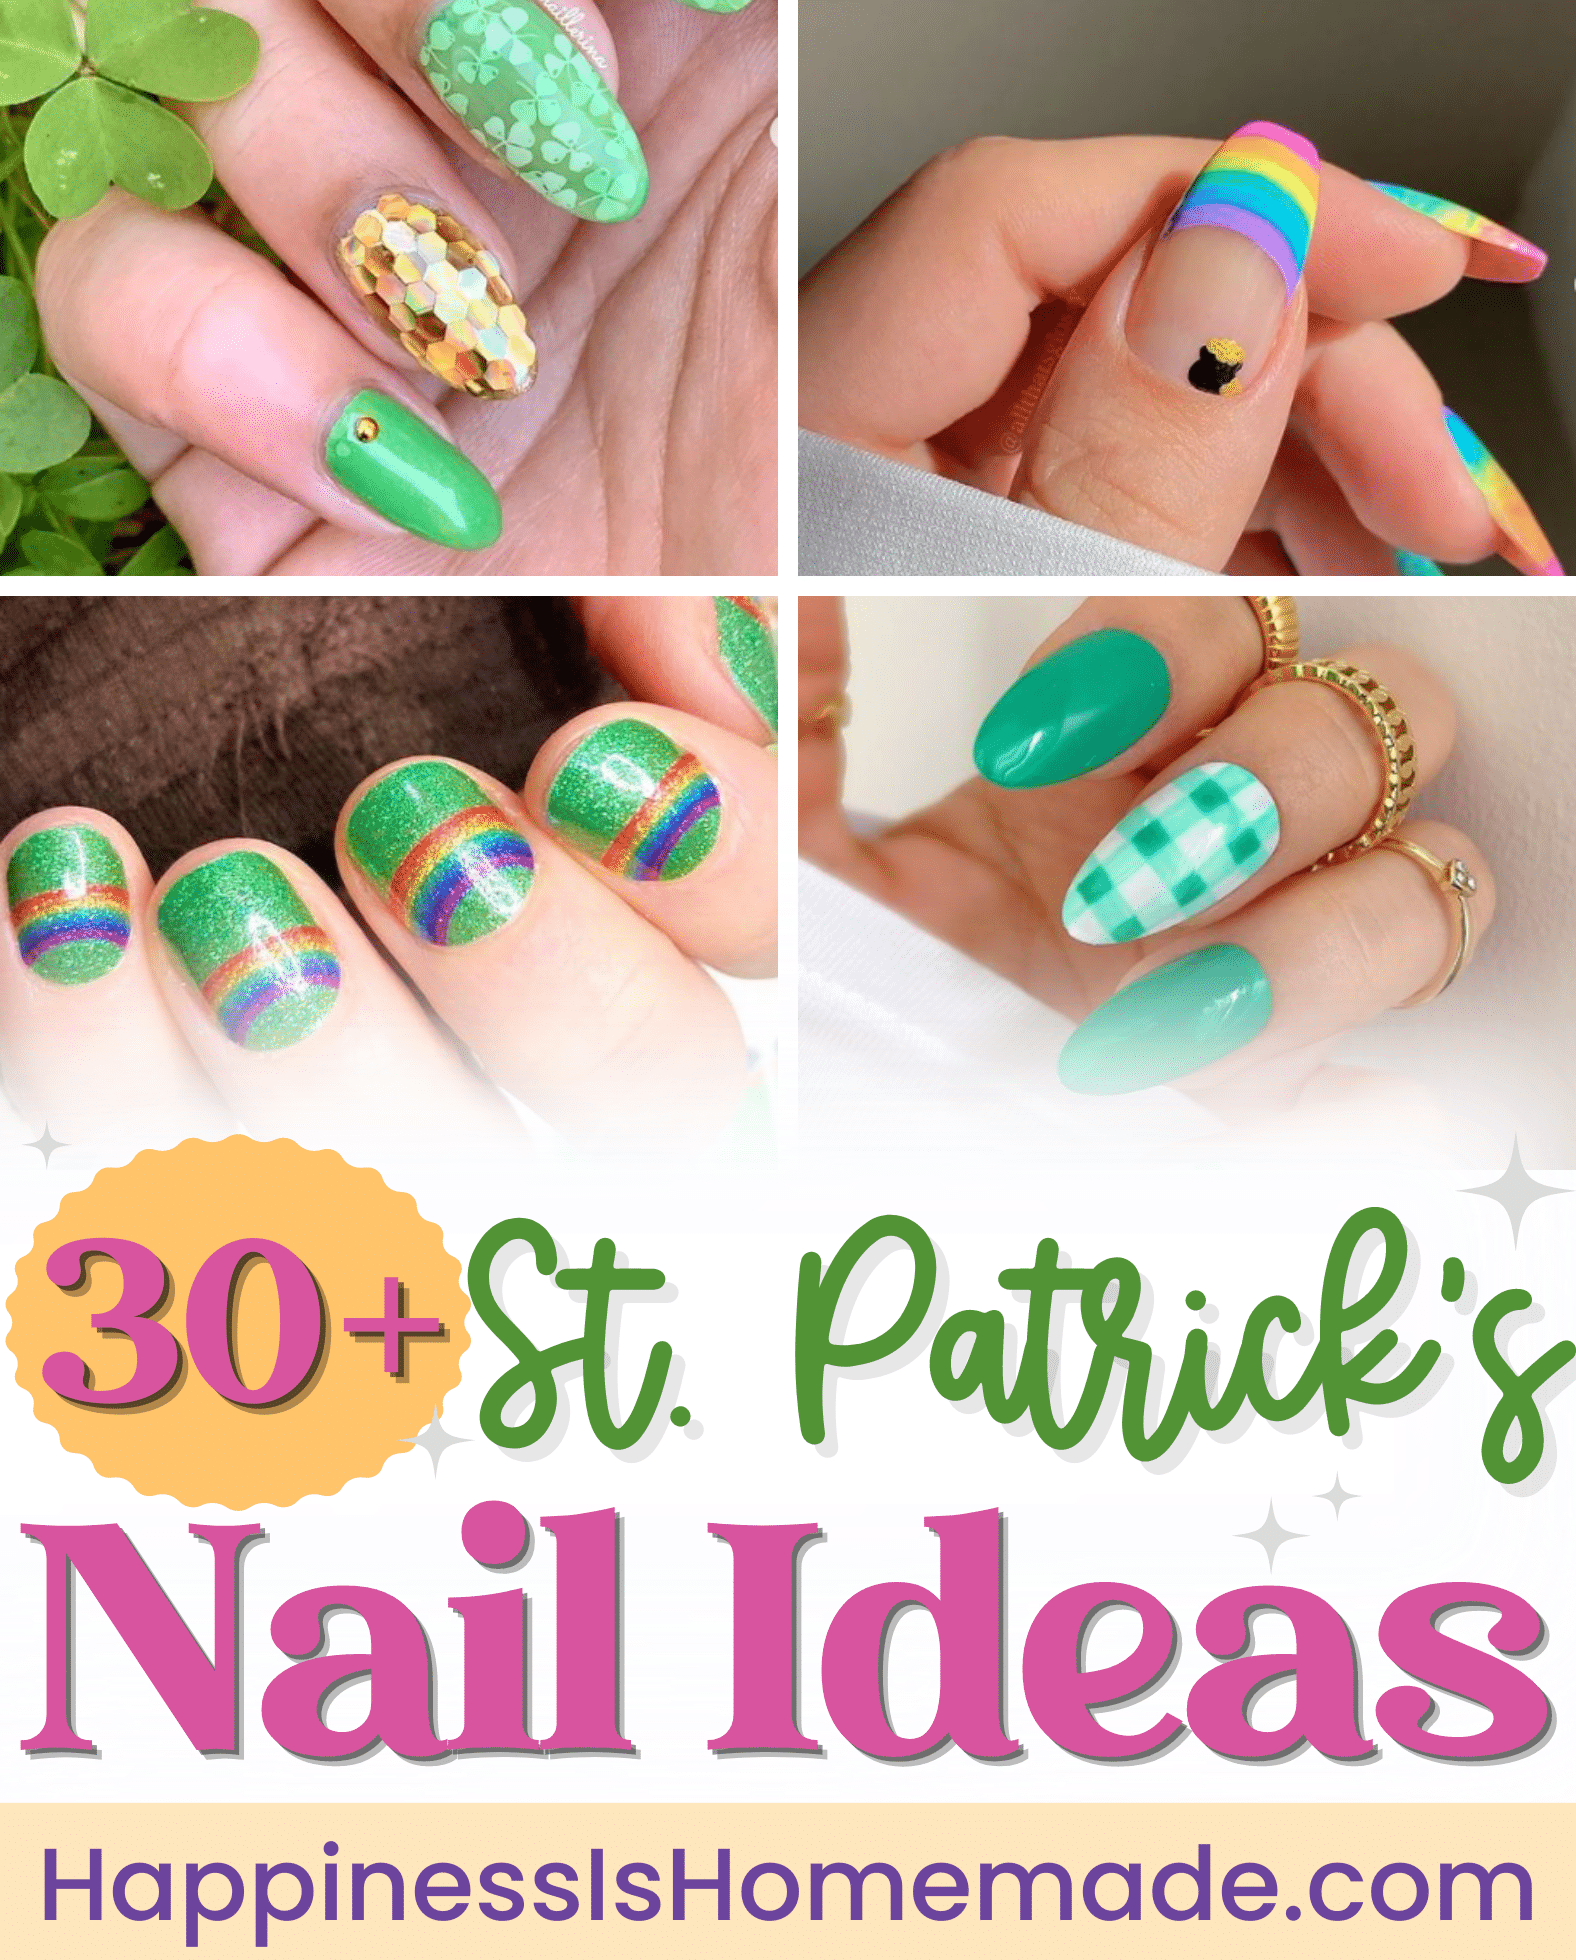 Template Nail Stamping Stickers Fun Prints Decals Nail Art